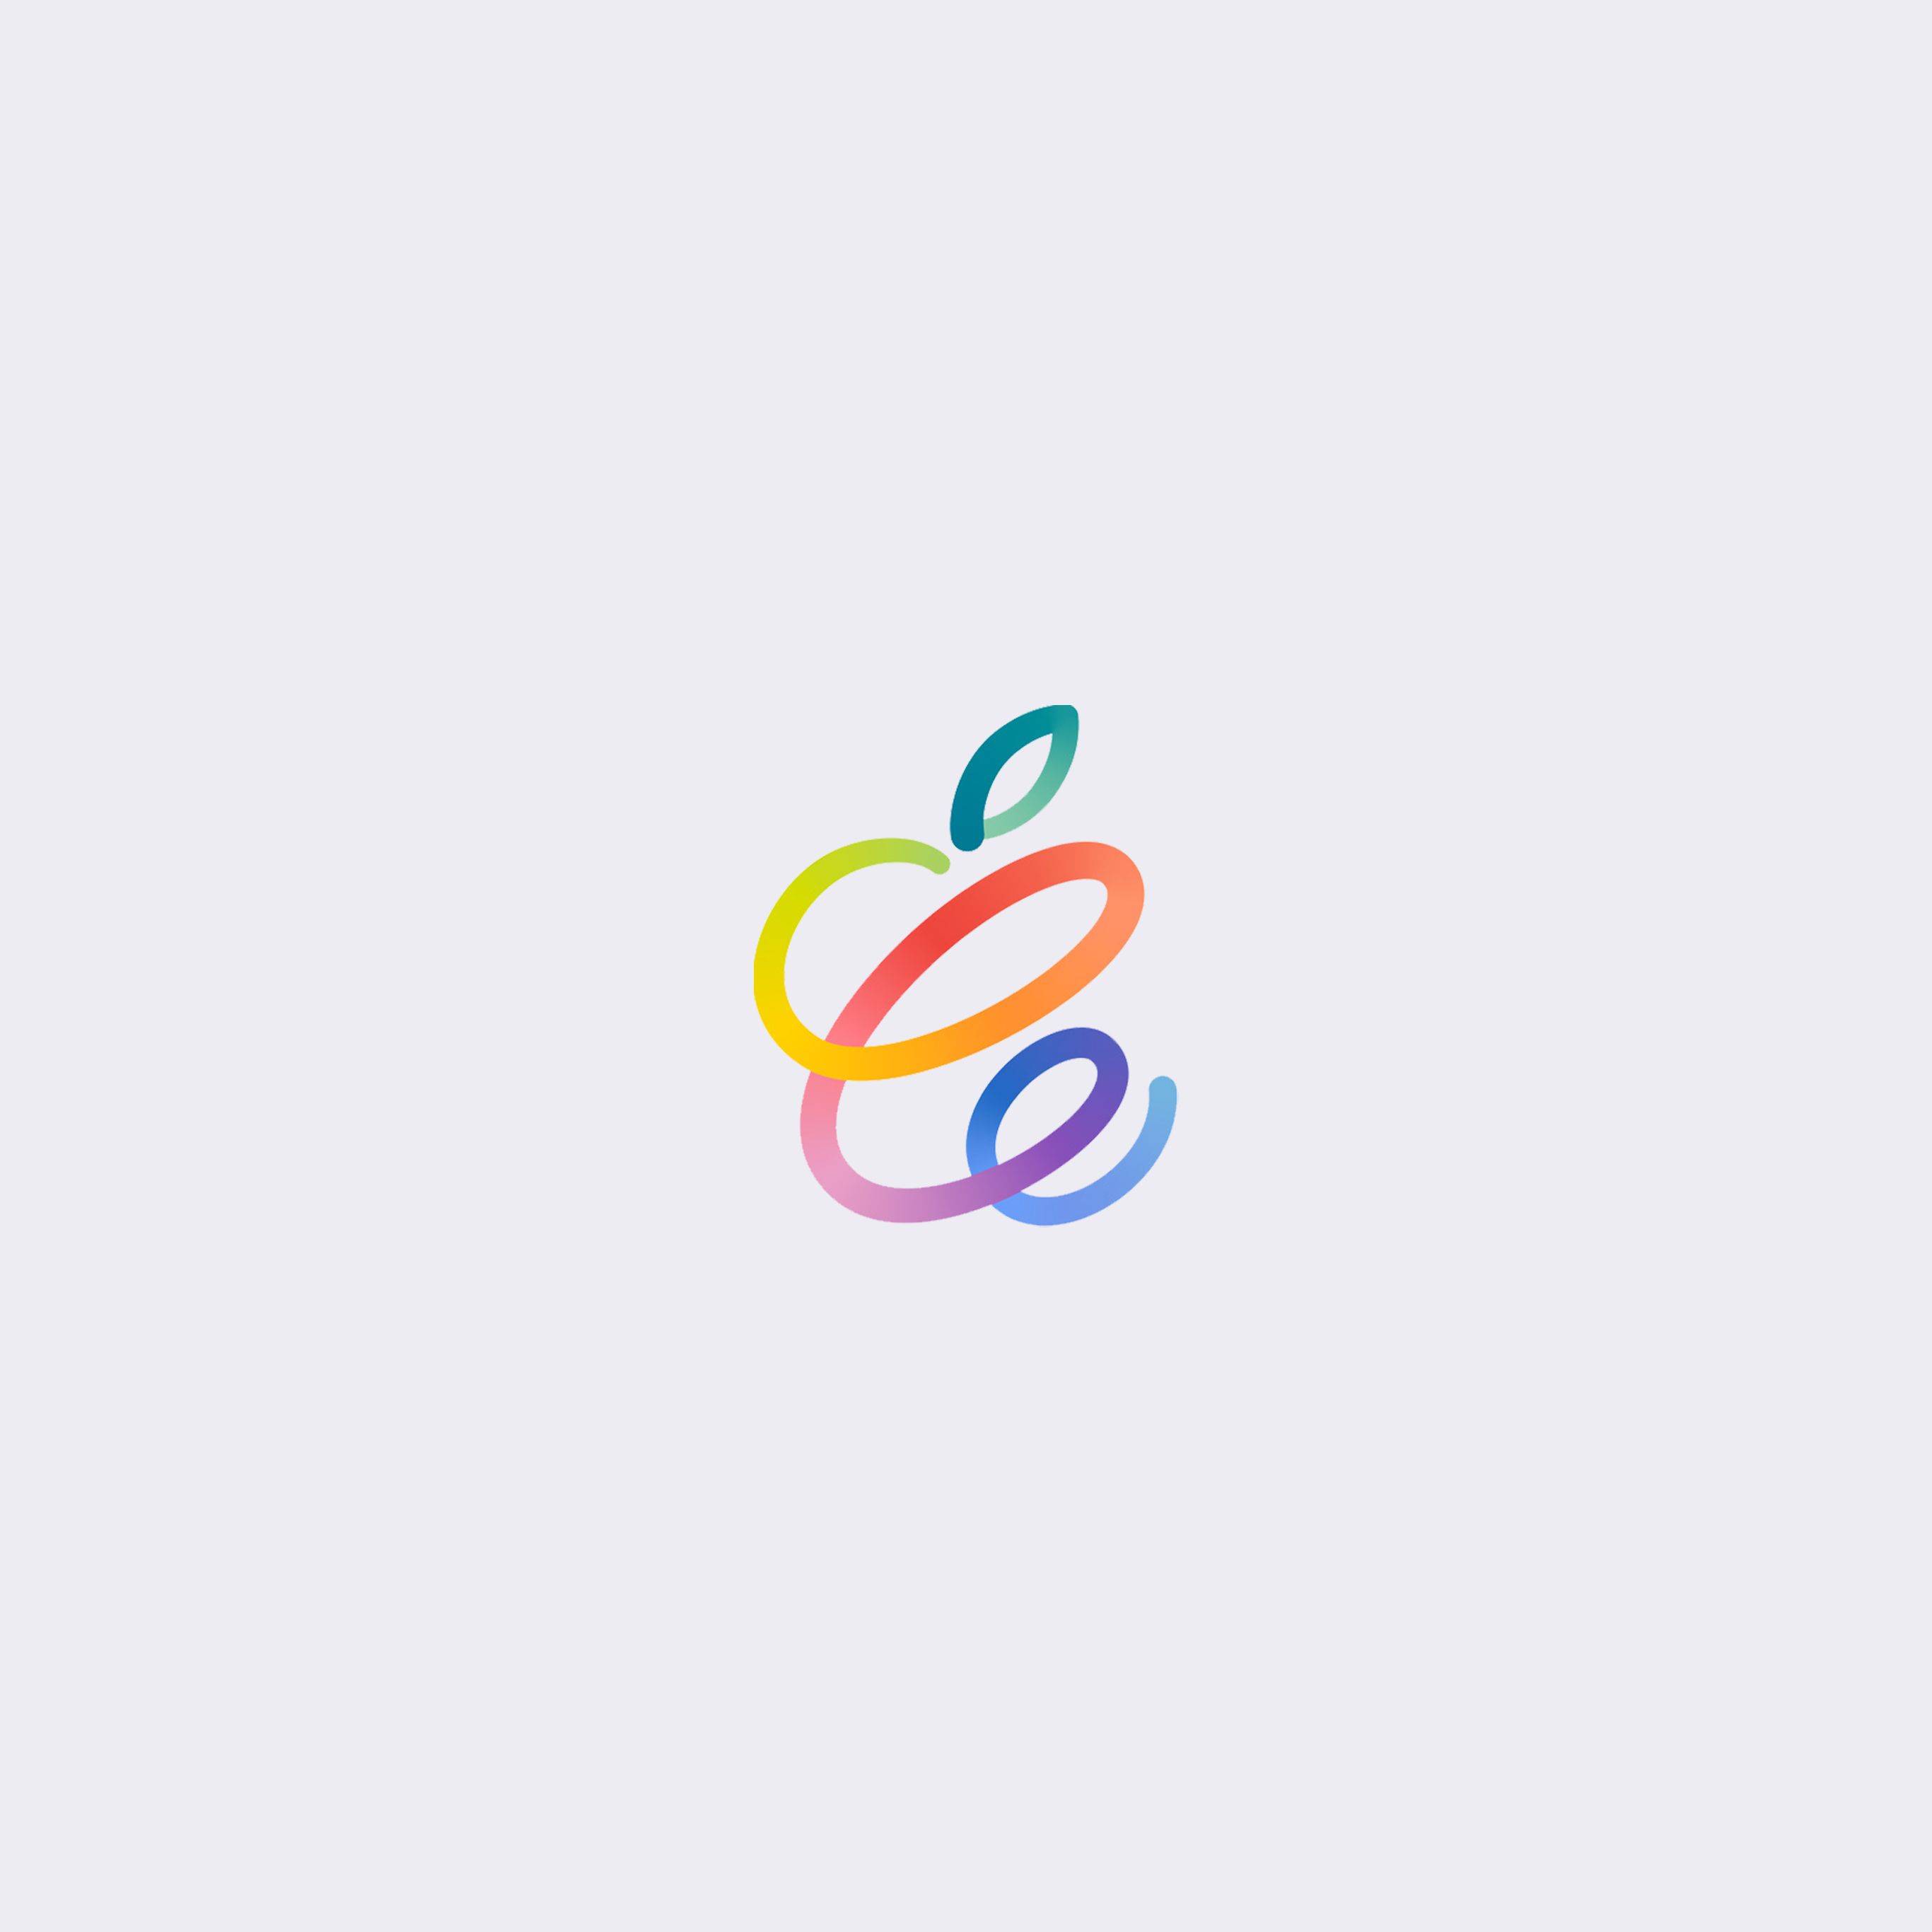 Apple Spring Loaded event wallpaper for iPhone, iPad, and Mac